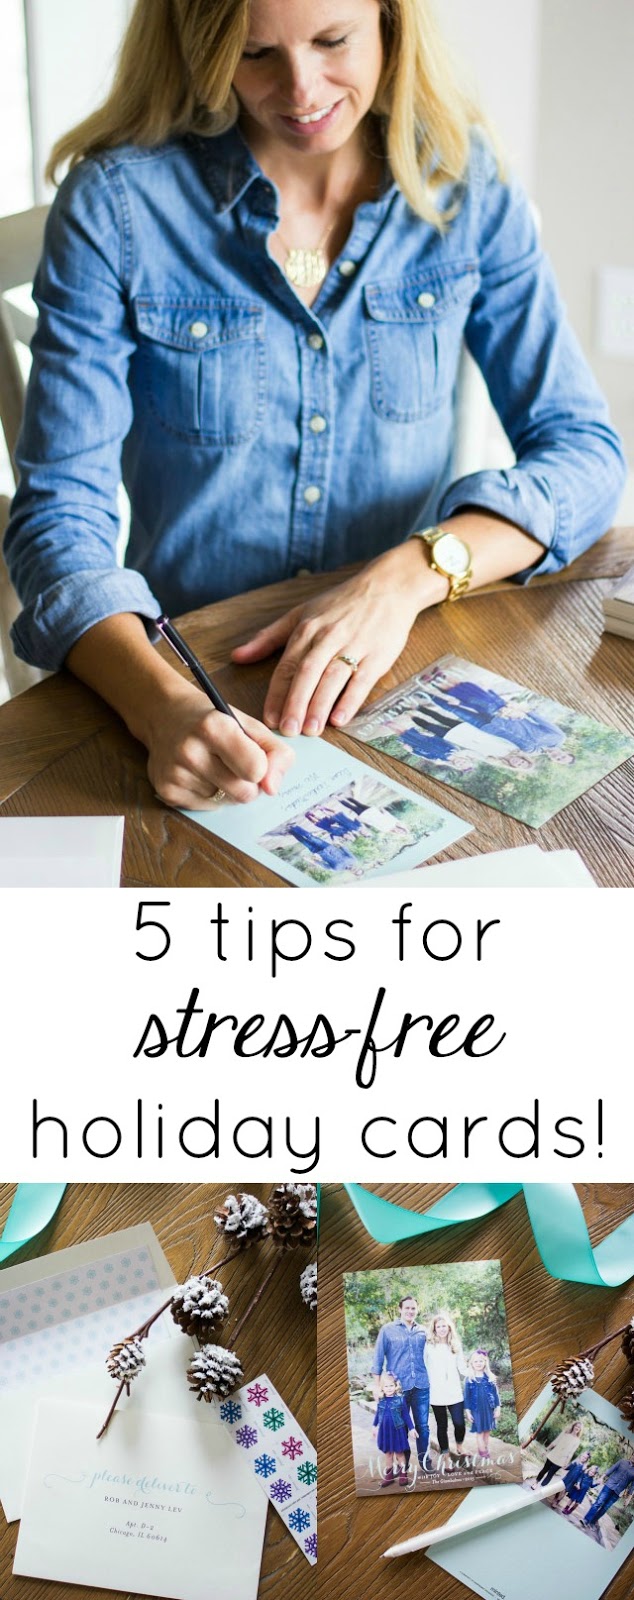 5 tips for stress-free holiday cards!